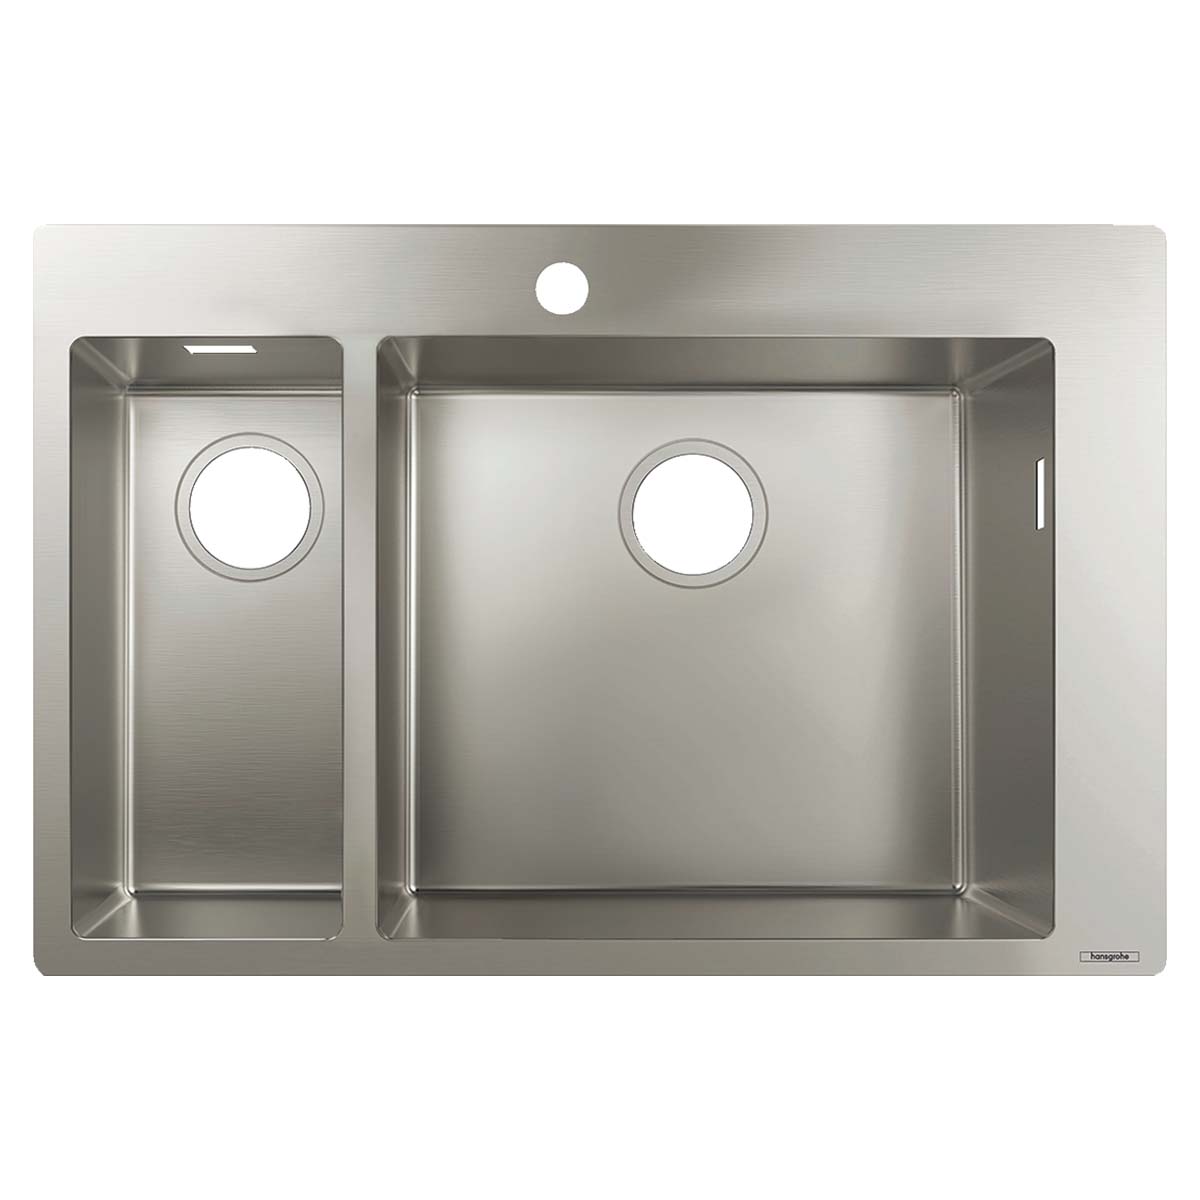 Hansgrohe S71 1.5 Bowl Kitchen Sink - 755x500mm - Stainless Steel